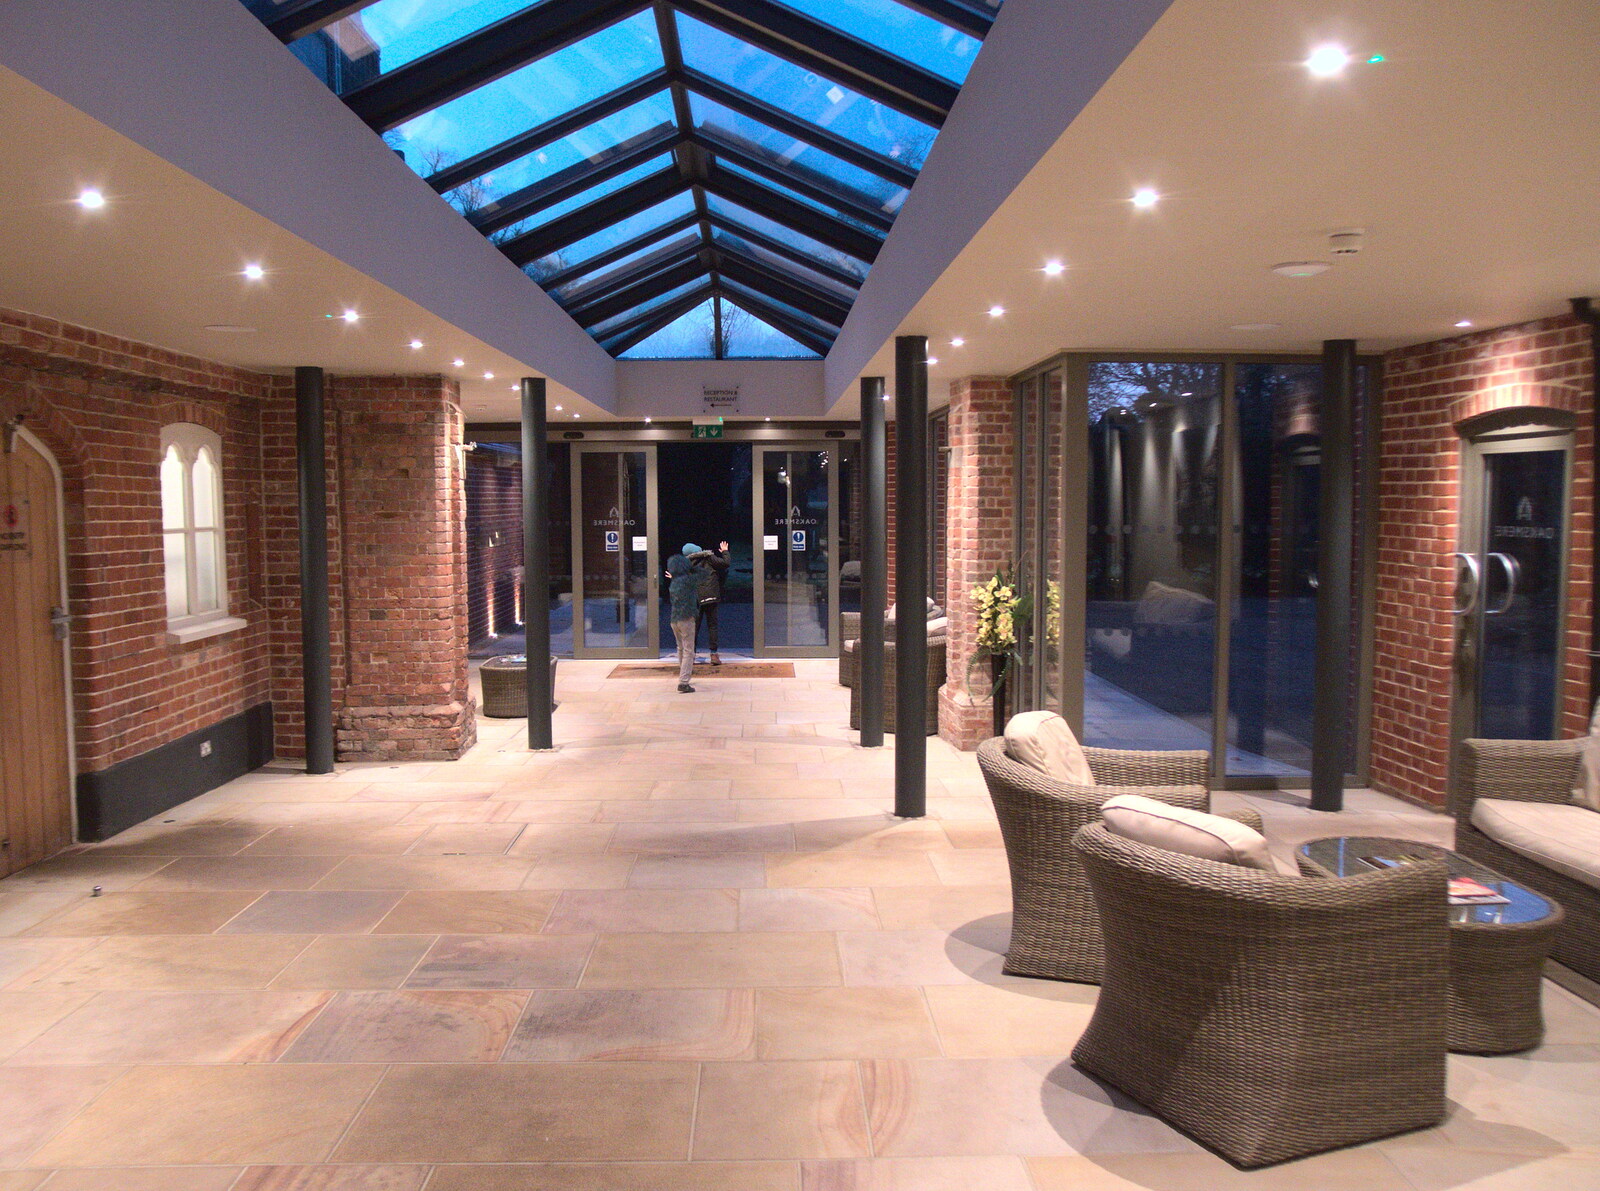 The Oaksmere's fancy new lobby/atrium from The G-Unit's Birthday, Brome, Suffolk - 20th January 2019